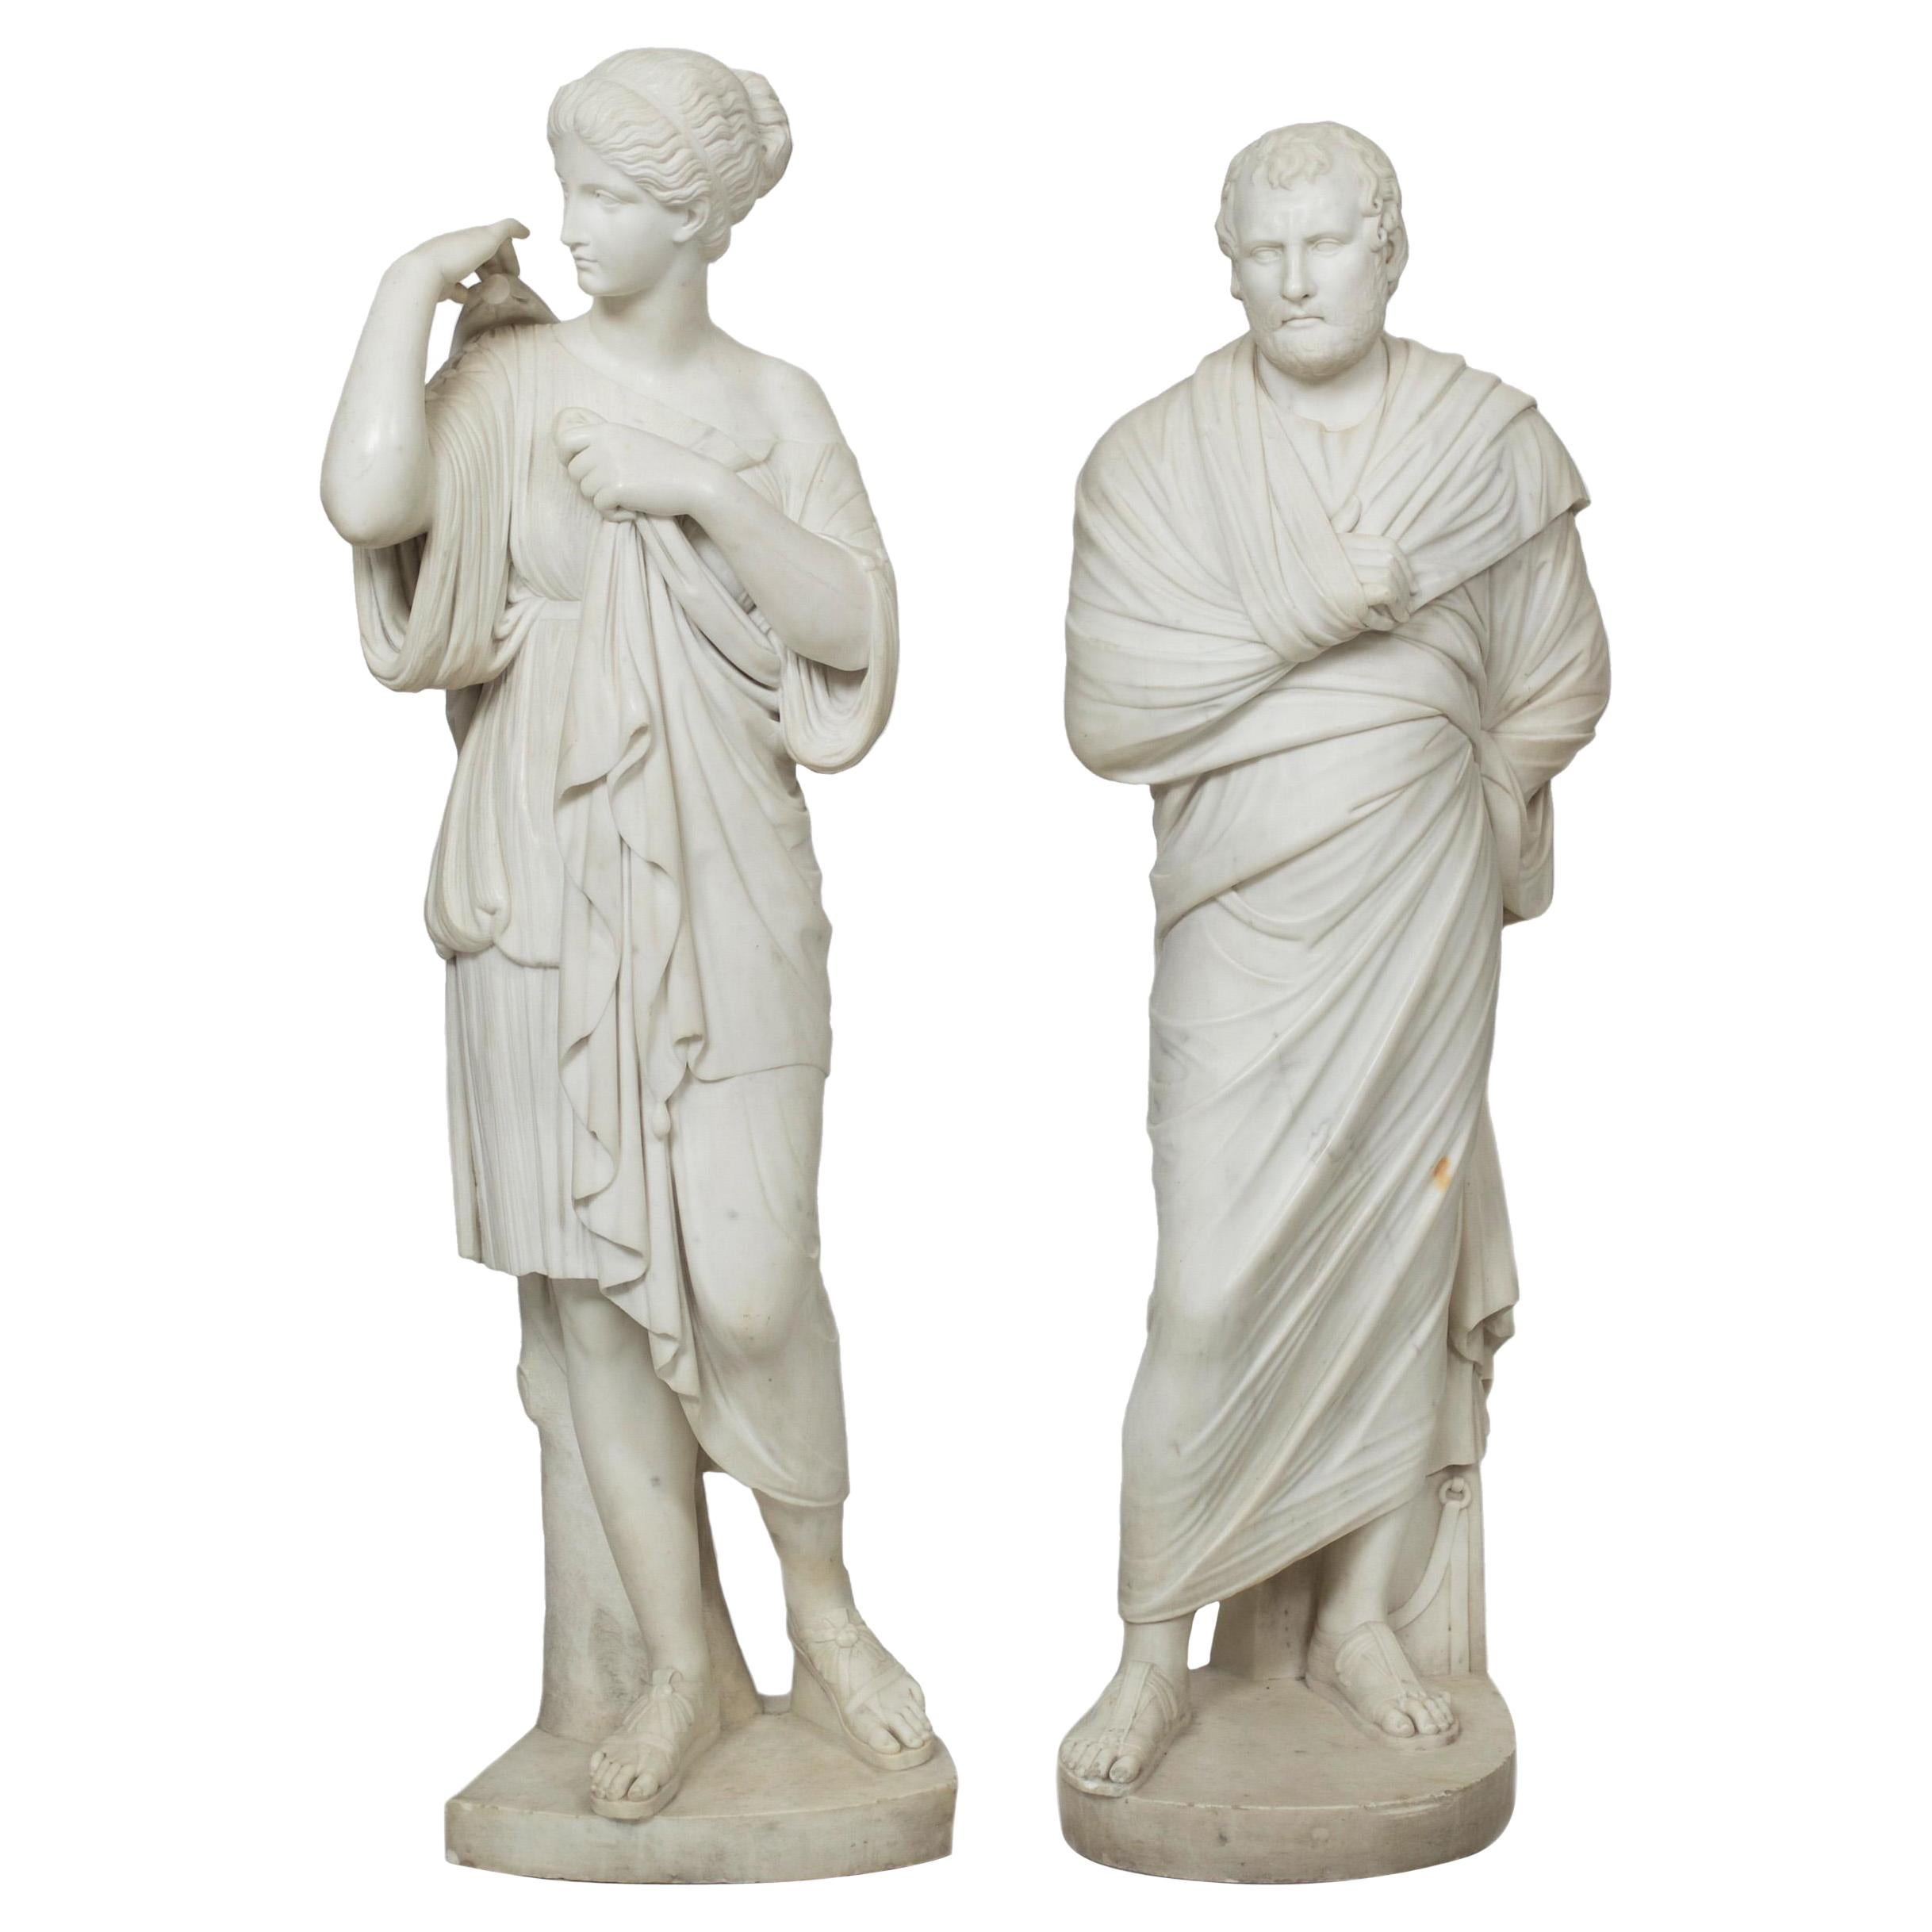 Pair of Classical Sculpture Statues "Diana of Gabii" & "Aeschines", 19th Cent.